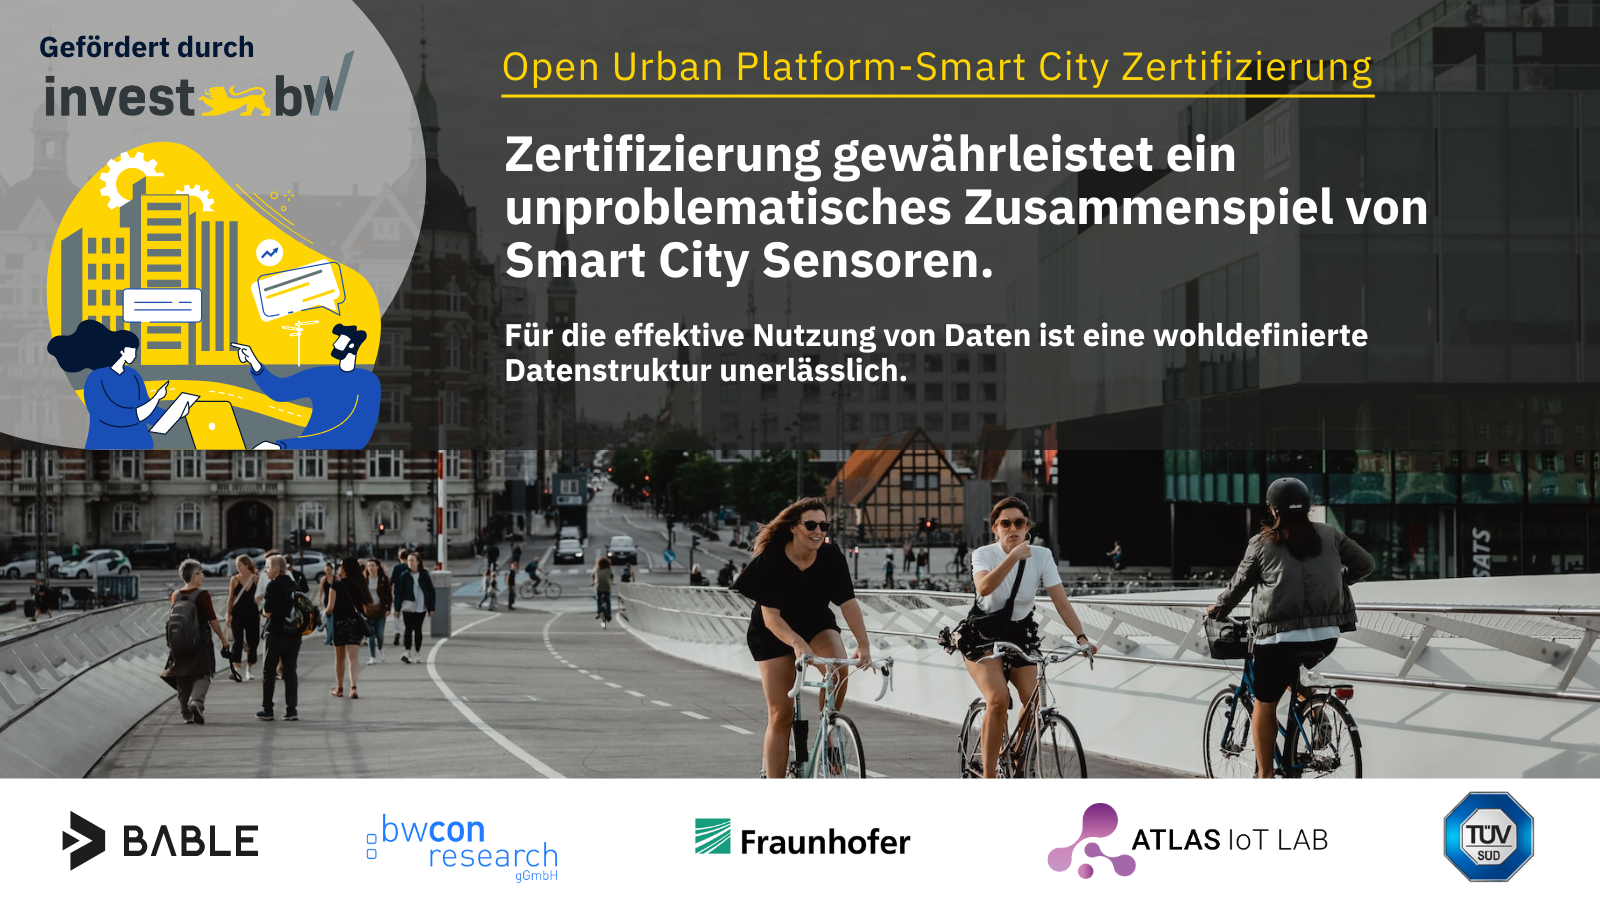 Innovation for smart cities: new interoperability testbed